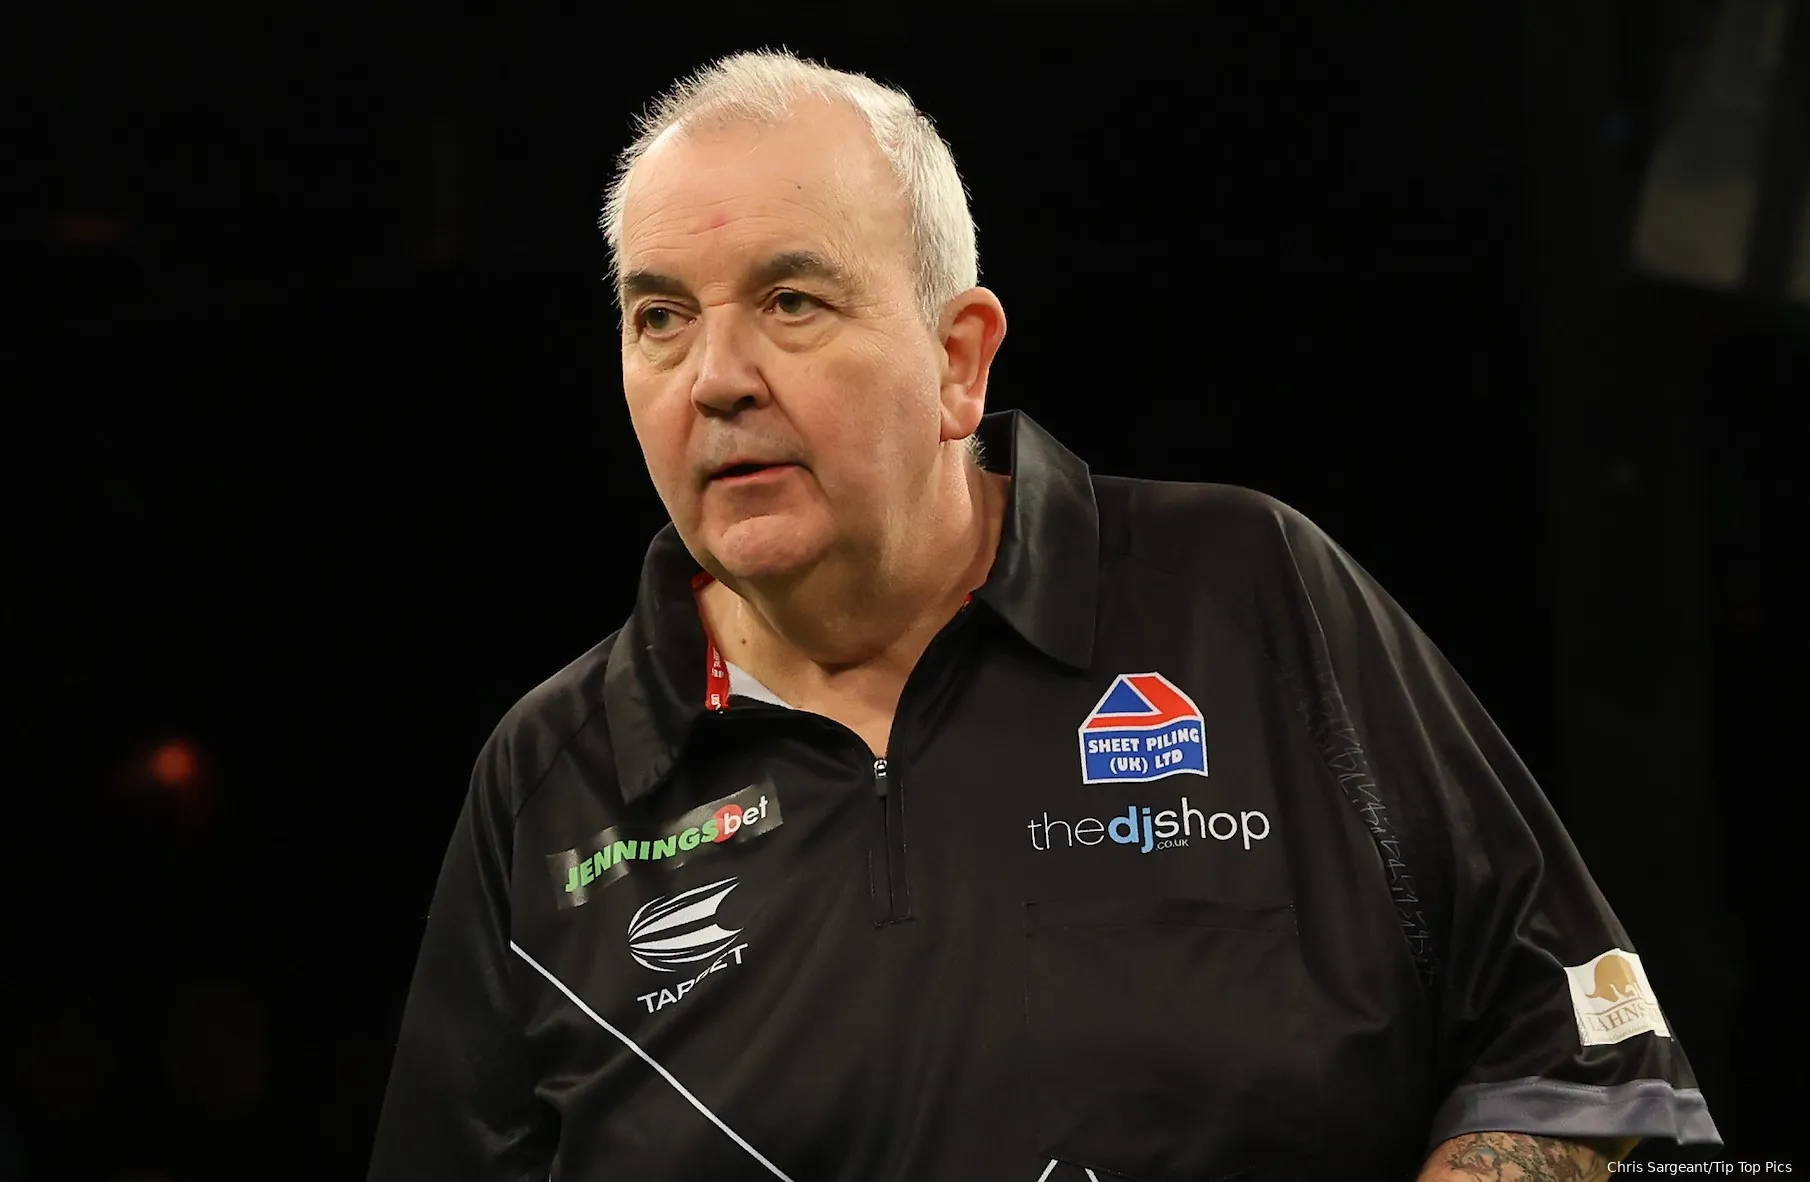 phil taylor wsdtwc20232332